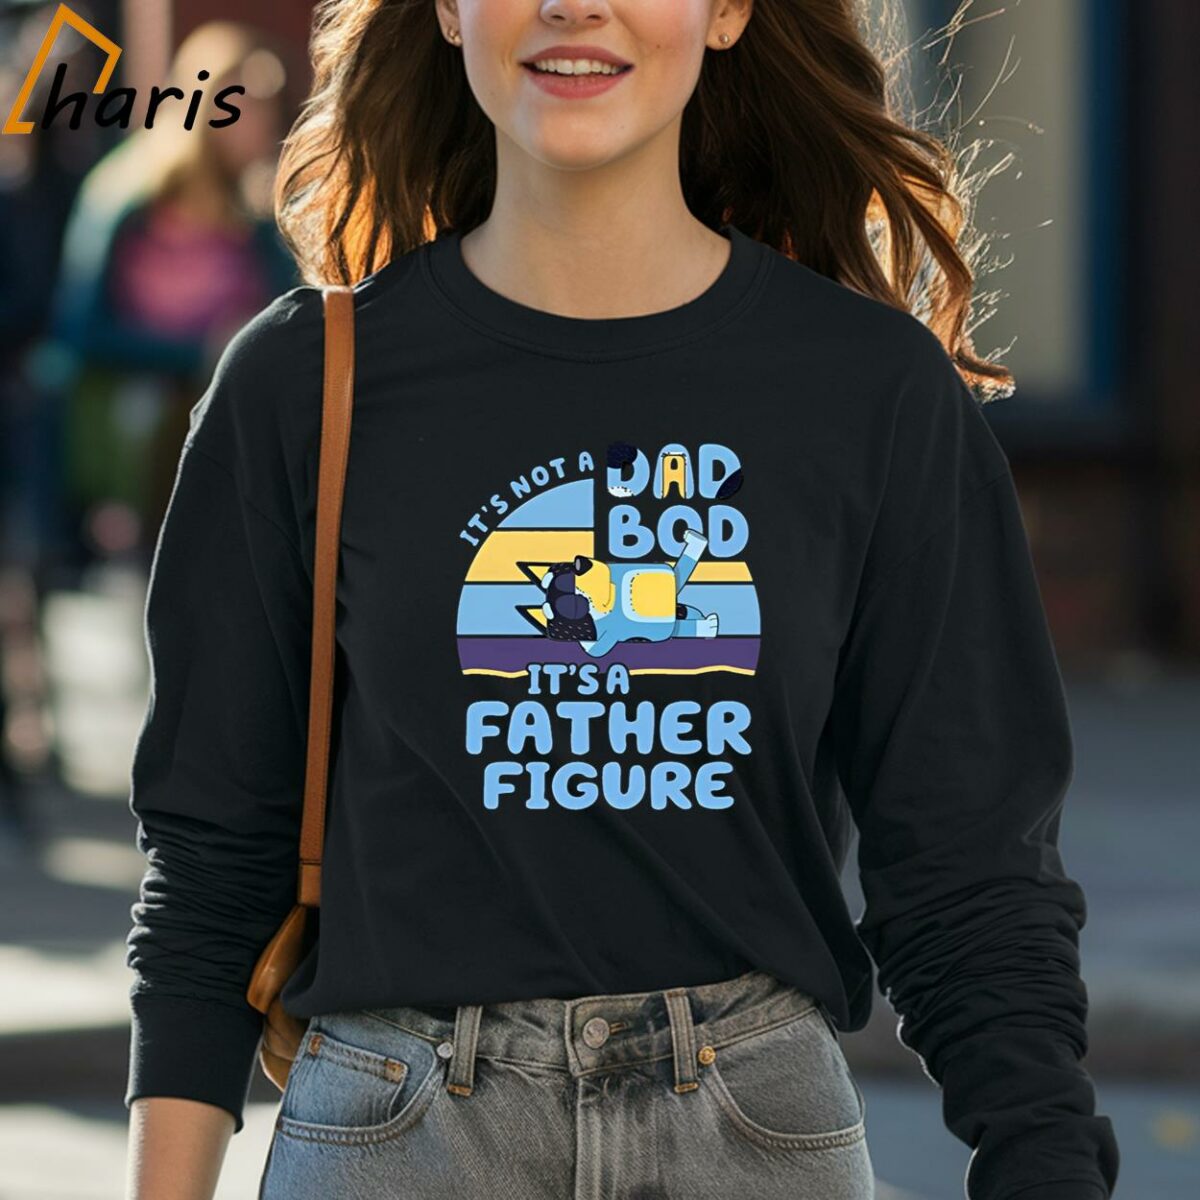 Its Not A Dad Bod Its A Father Figure Funny Bluey Shirt 4 long sleeve shirt